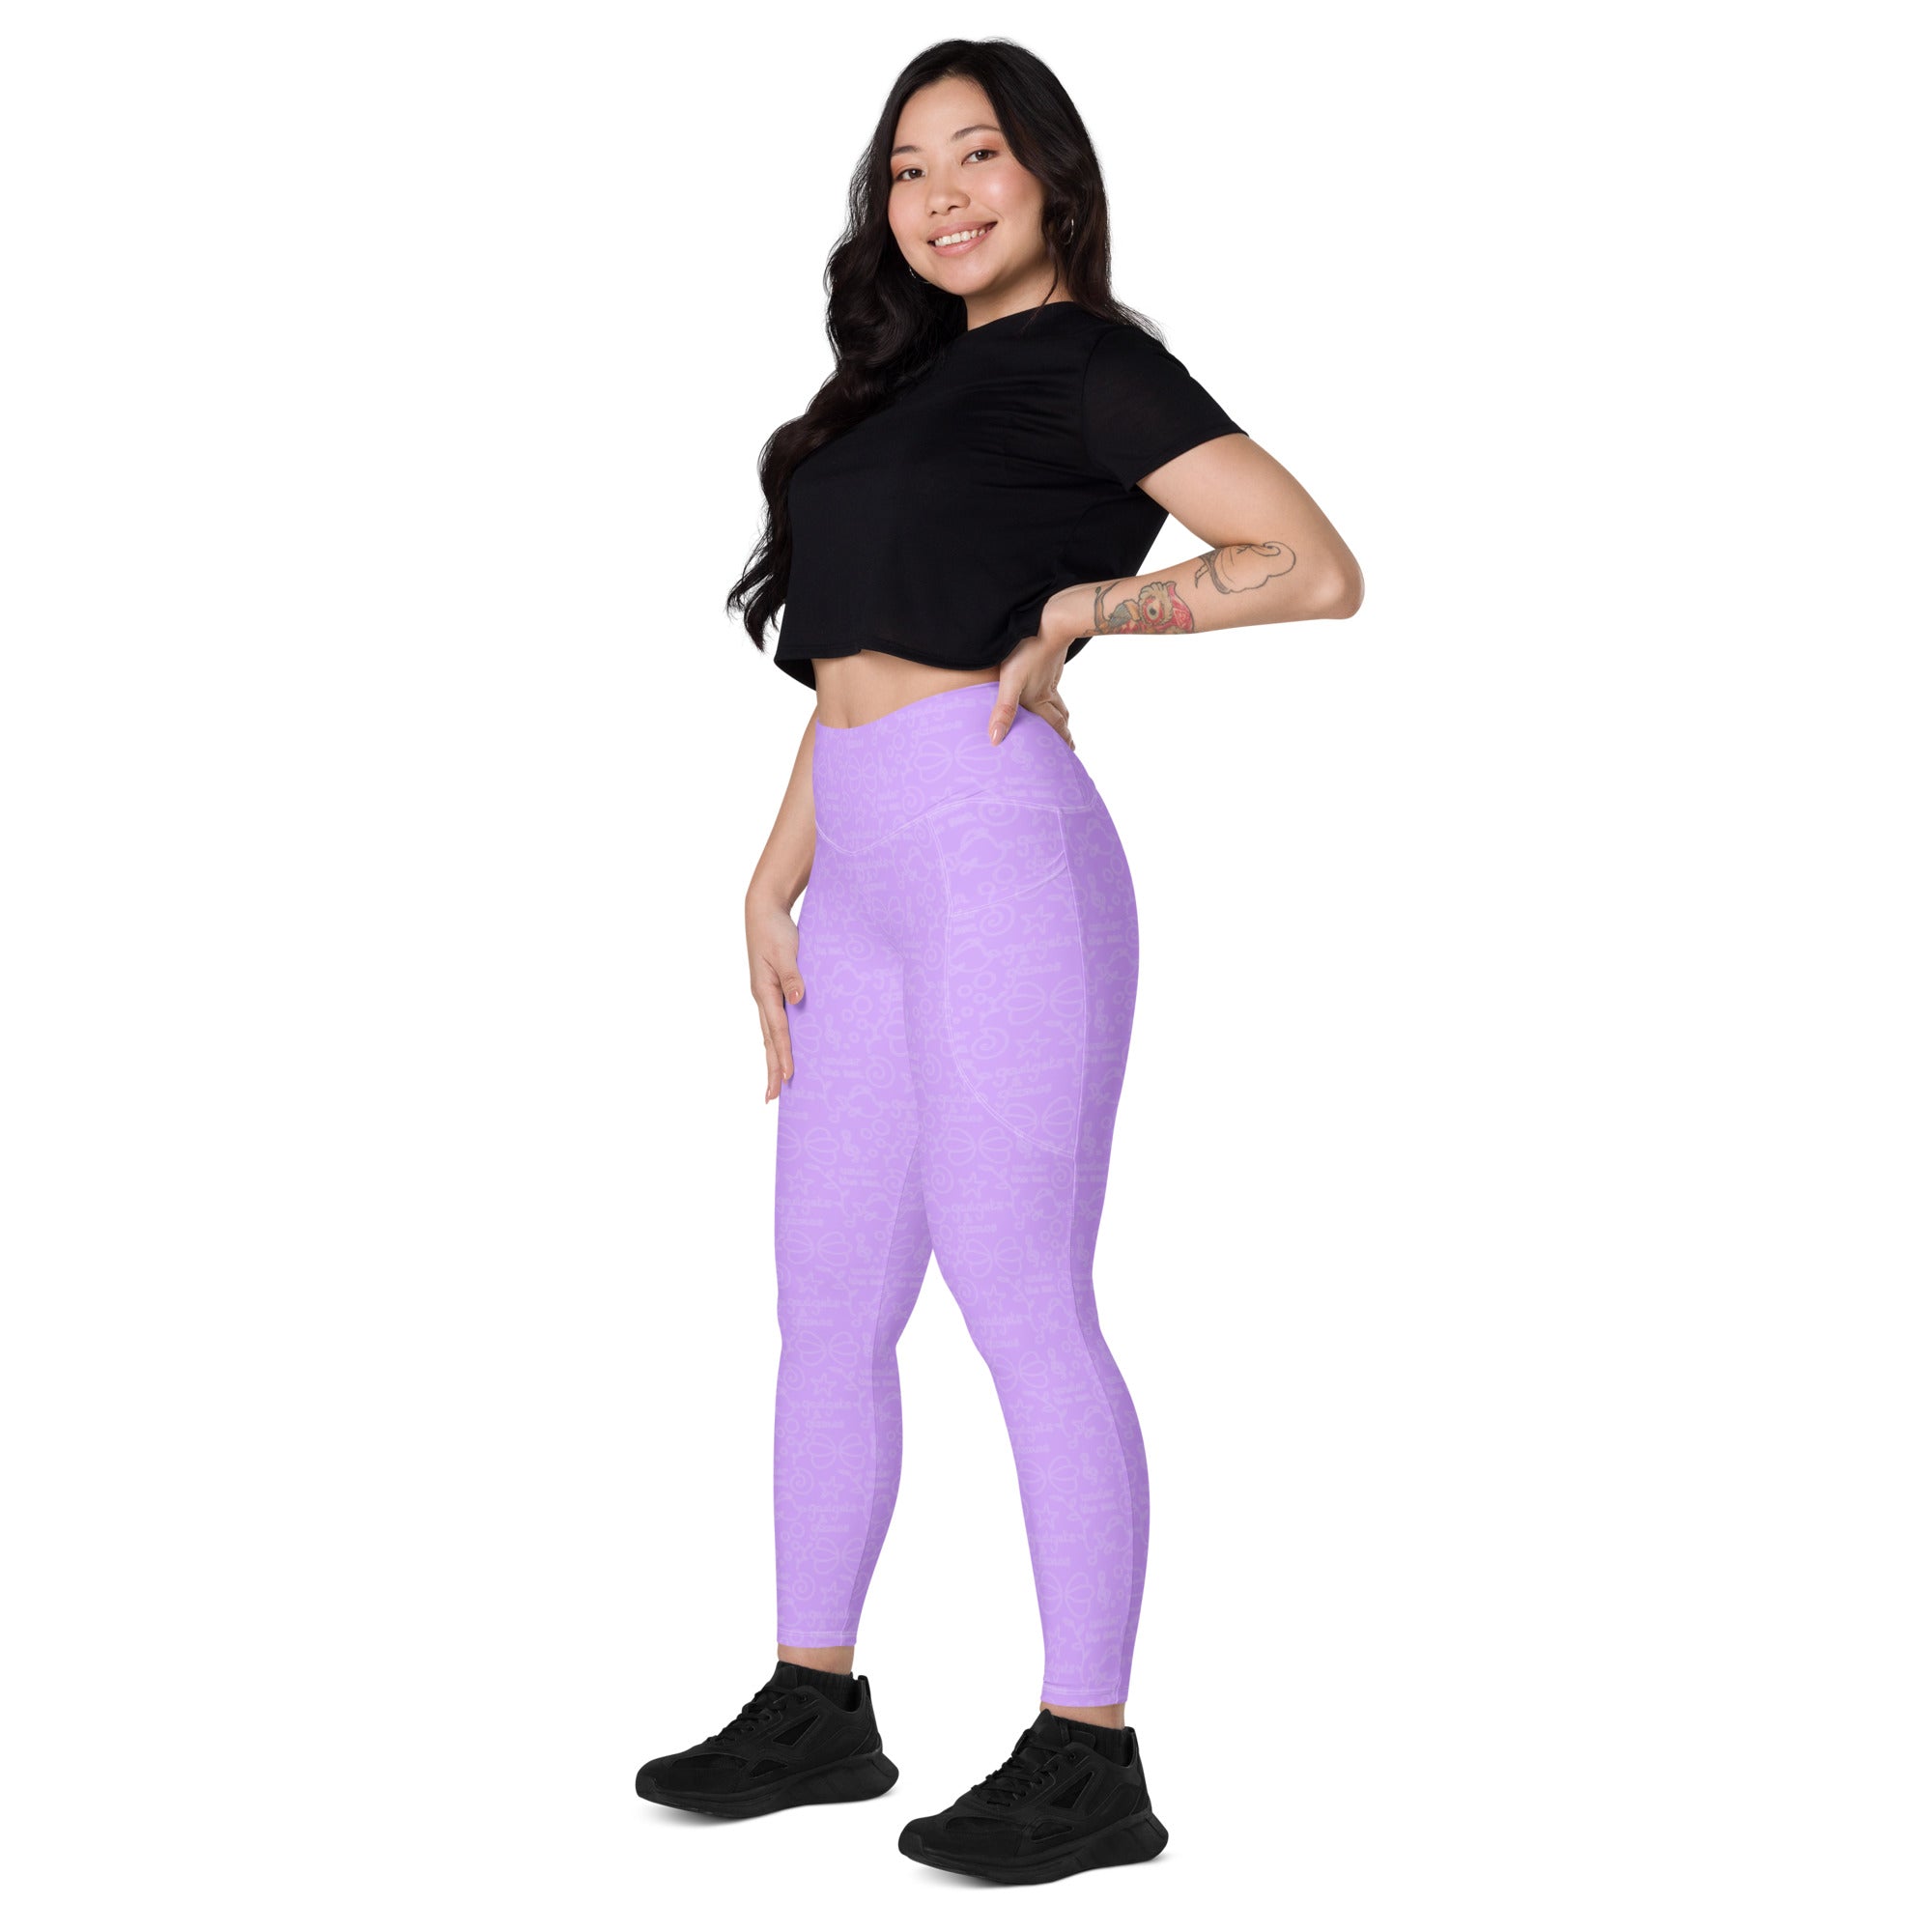 Ariel Leggings with pockets